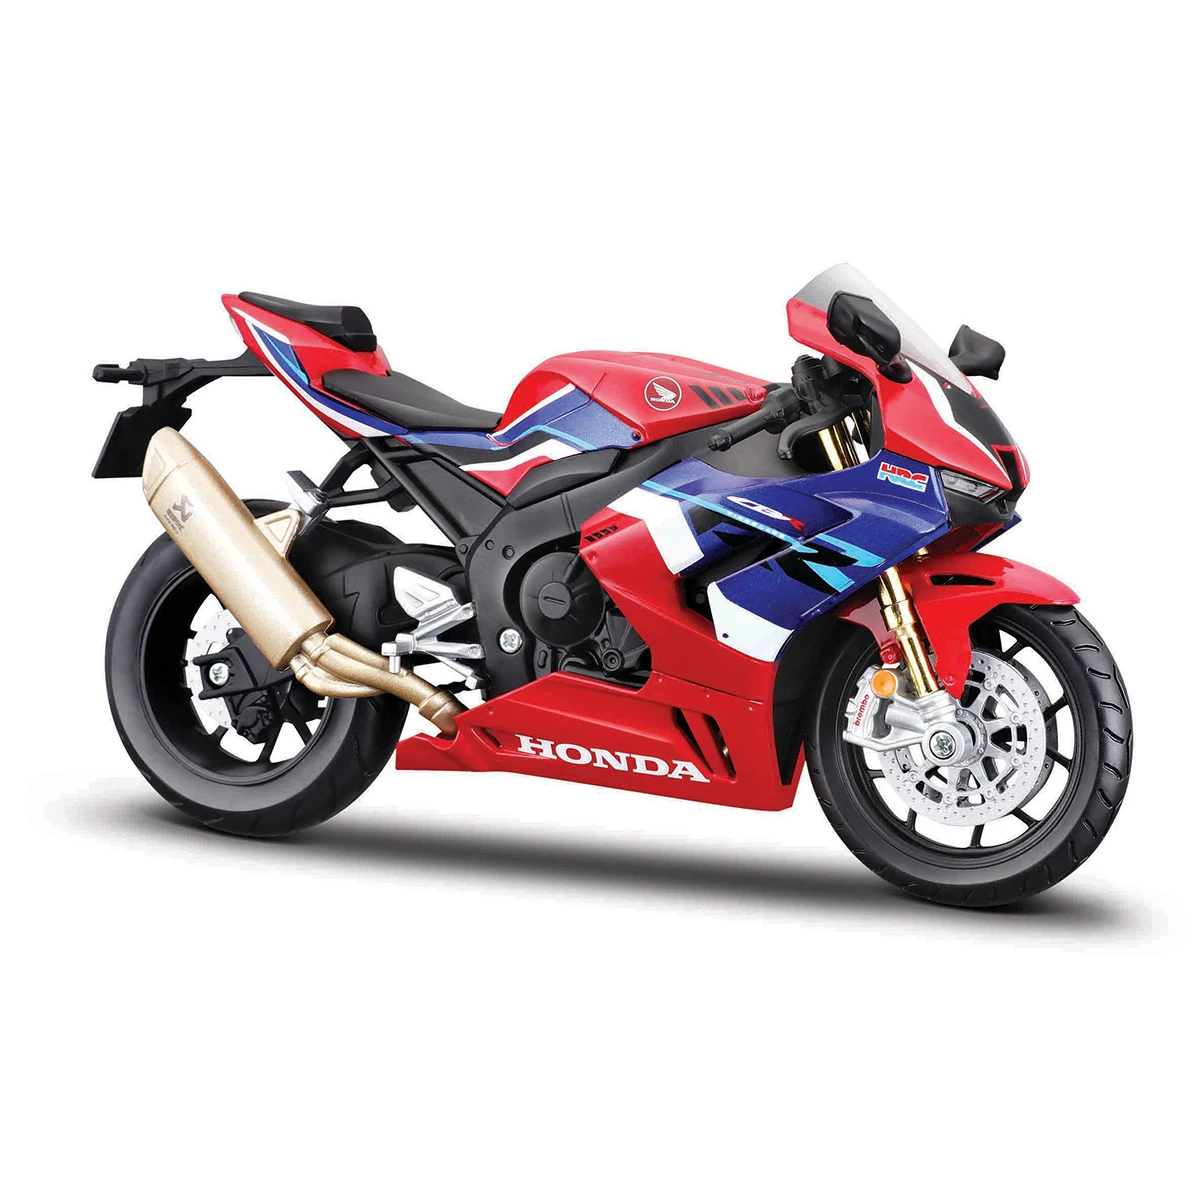 Maisto 1:18 Honda CBR1000RR-R Fireblade SP Static Die Cast Vehicles Collectible Hobbies Motorcycle Model Toys